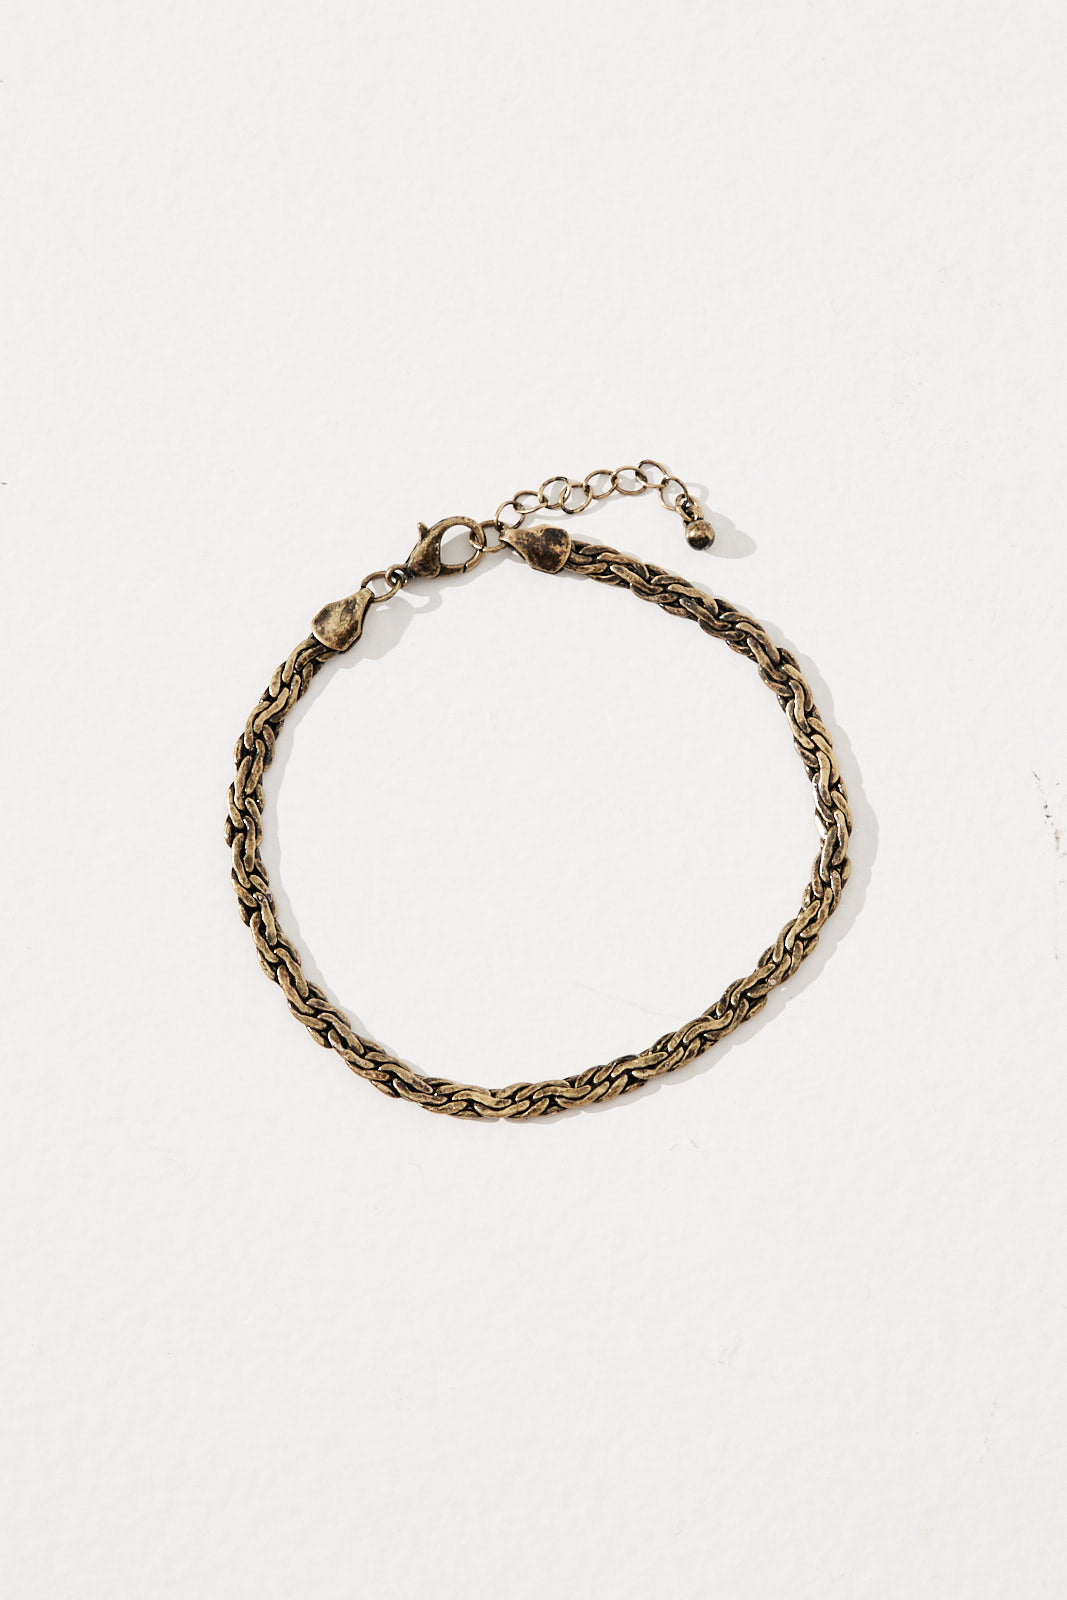 NTH Link Chain Bracelet Gold NTH20201033-2